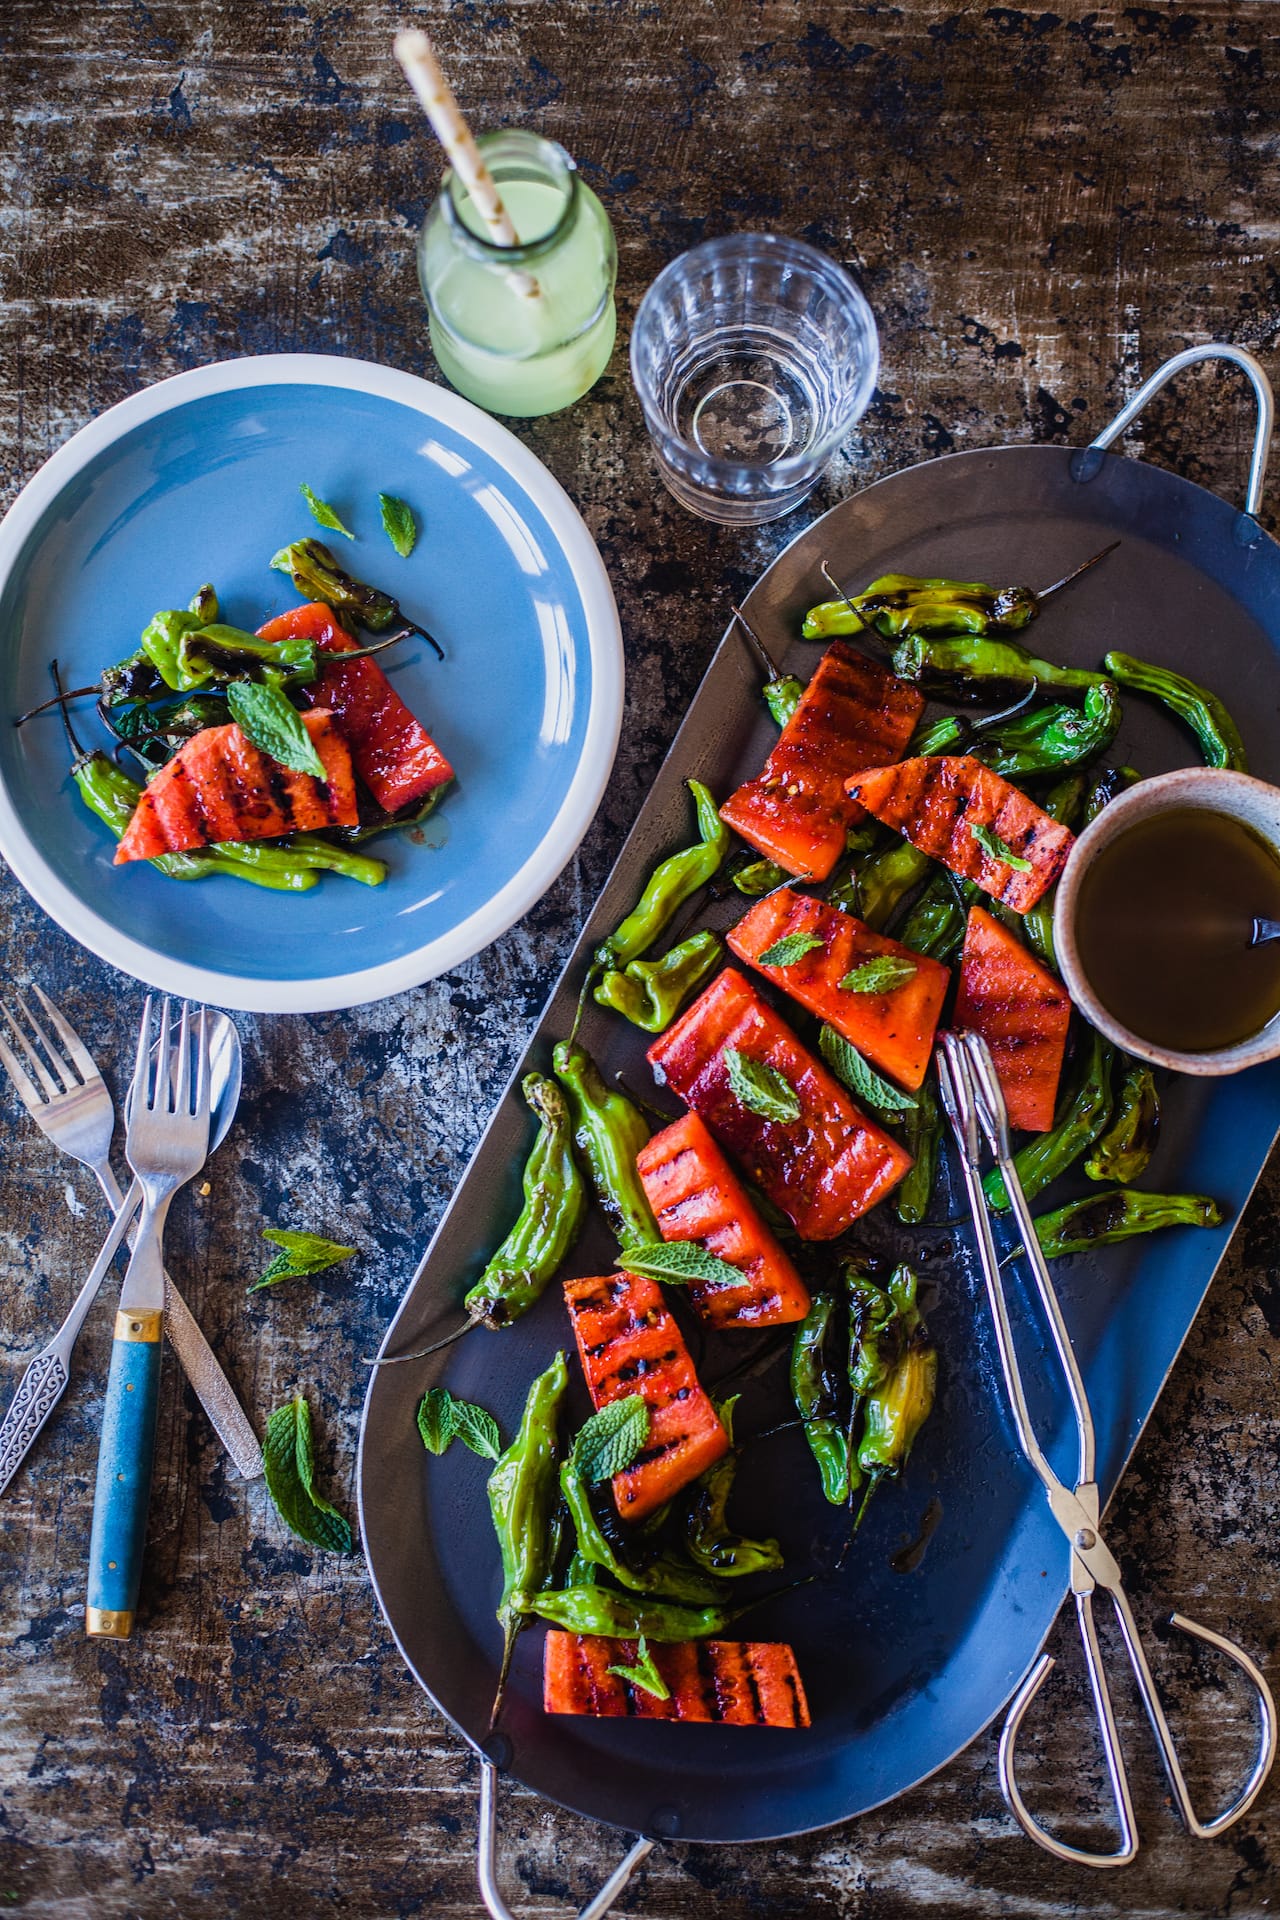 Grilled Watermelon and Shishito Peppers | Playful Cooking